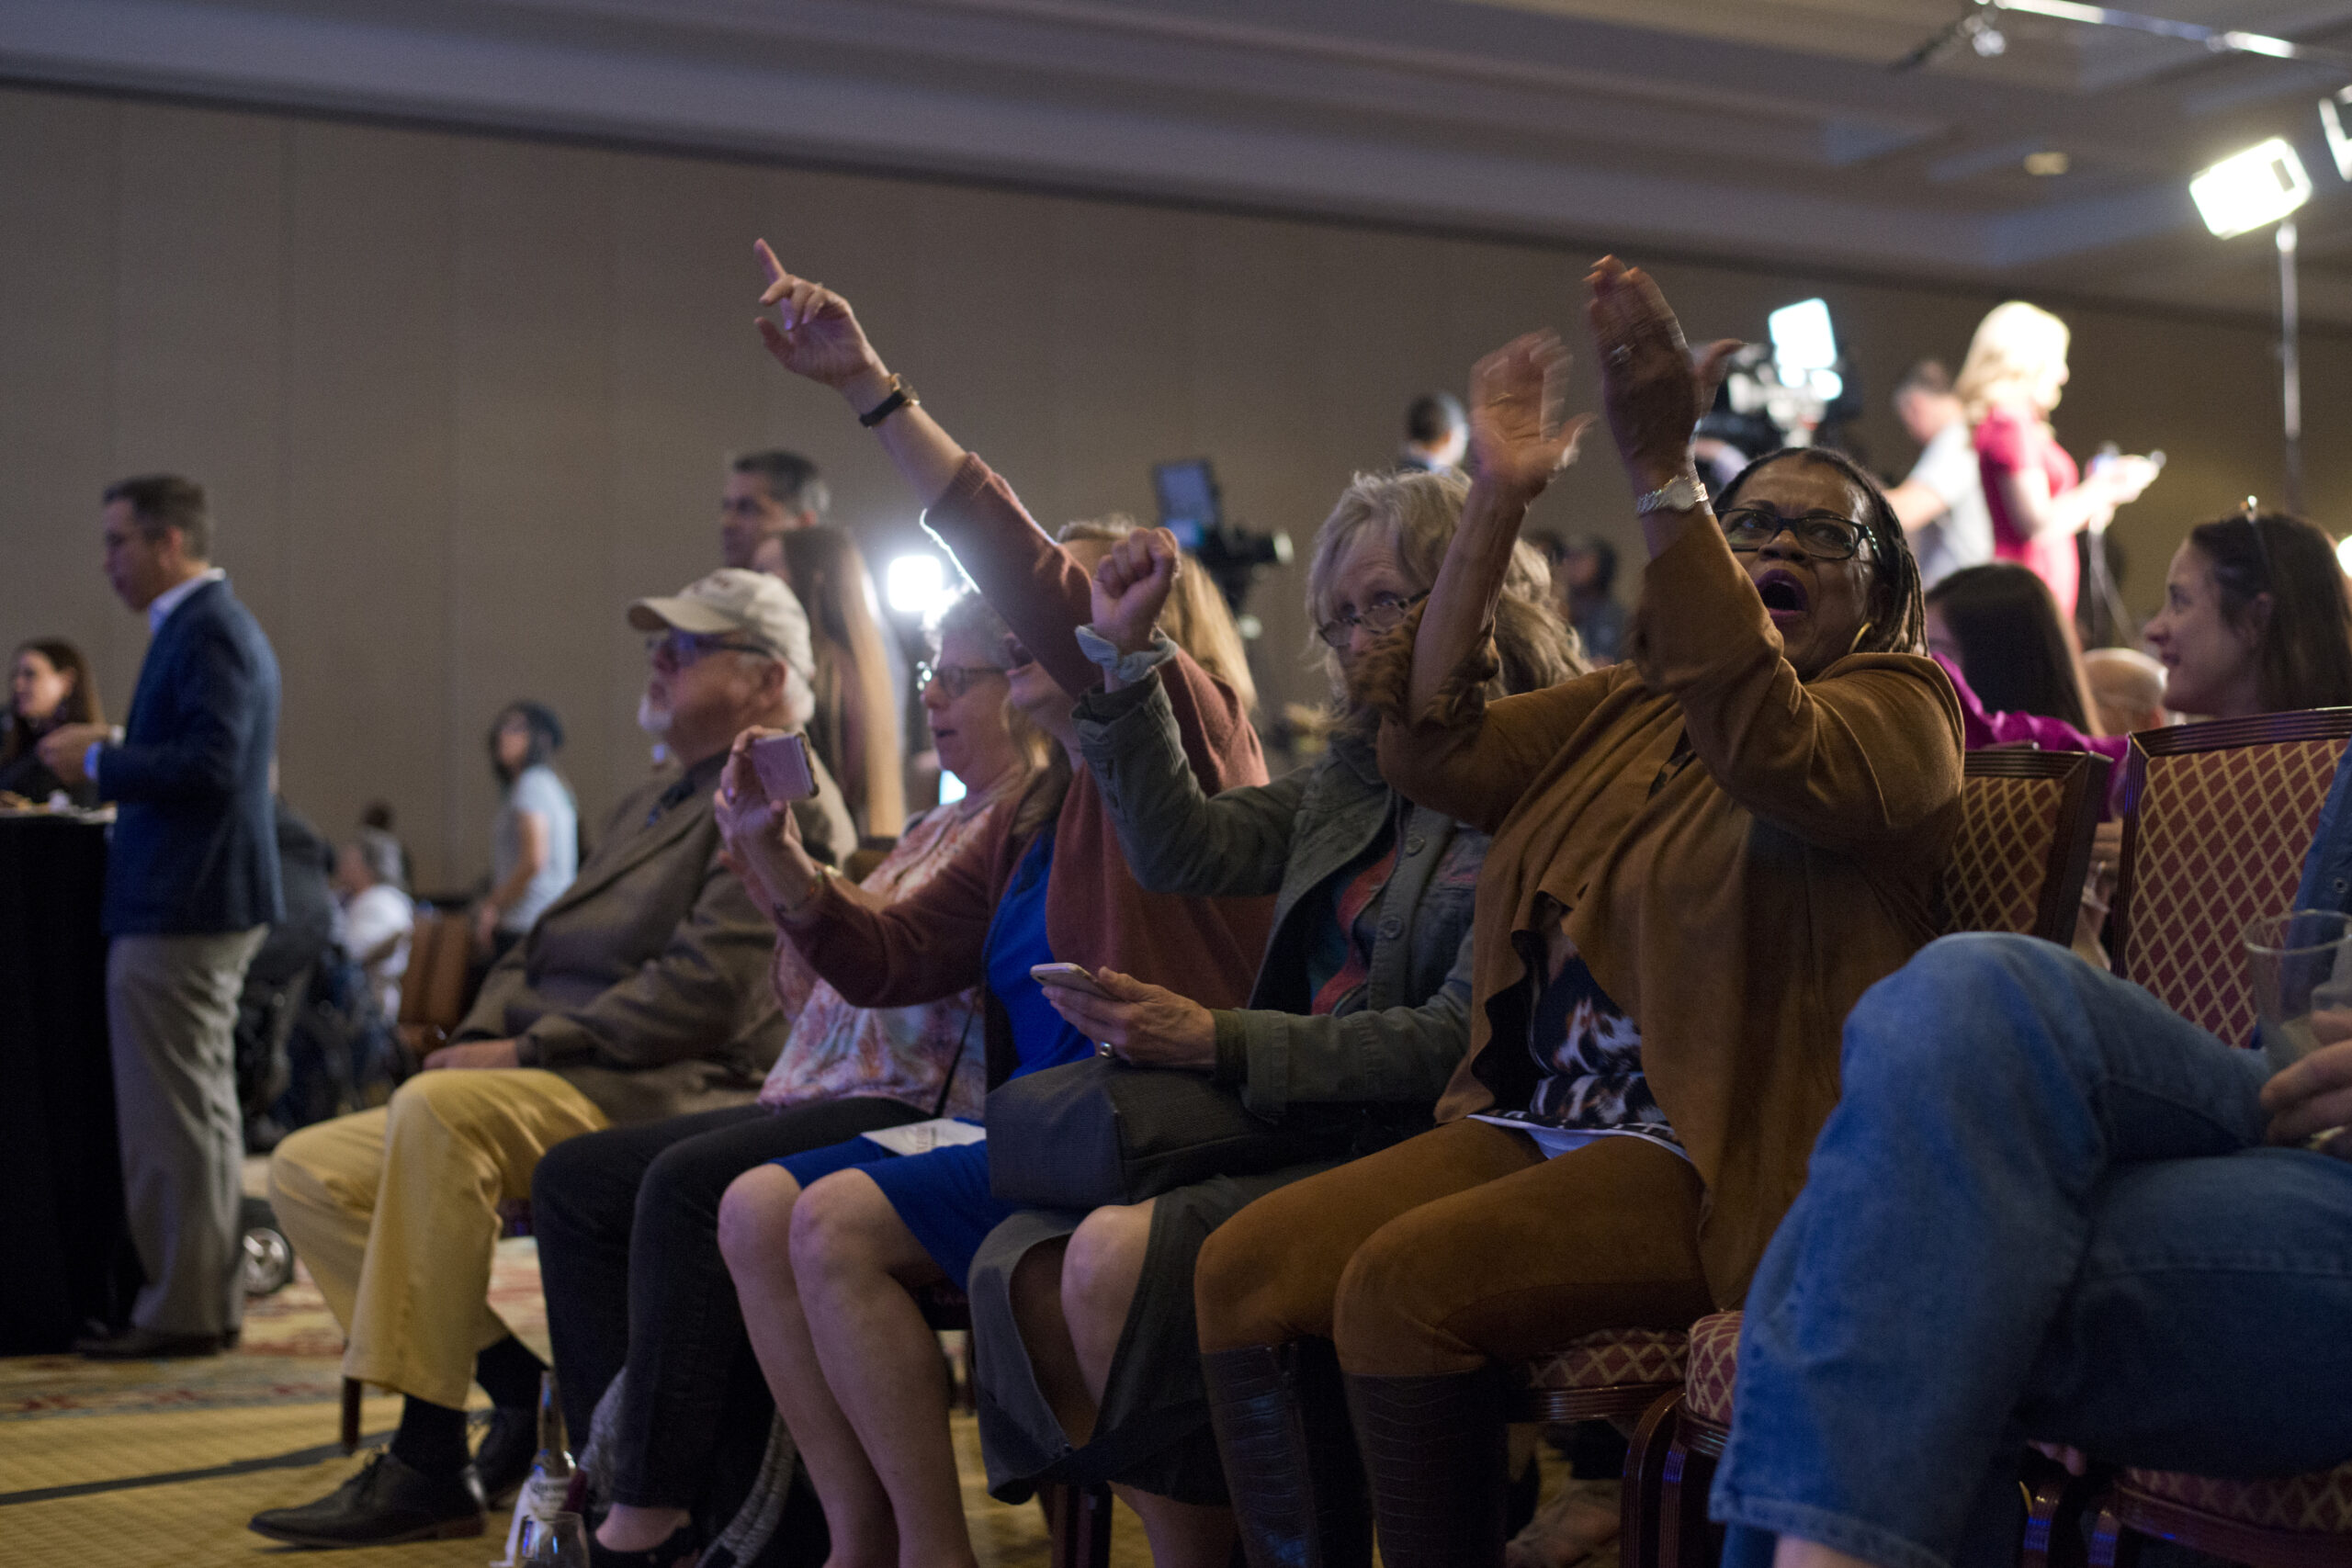 People react after the House is called in favor of Democrats during the Nevada Democratic Party election night event at Caesar Palace